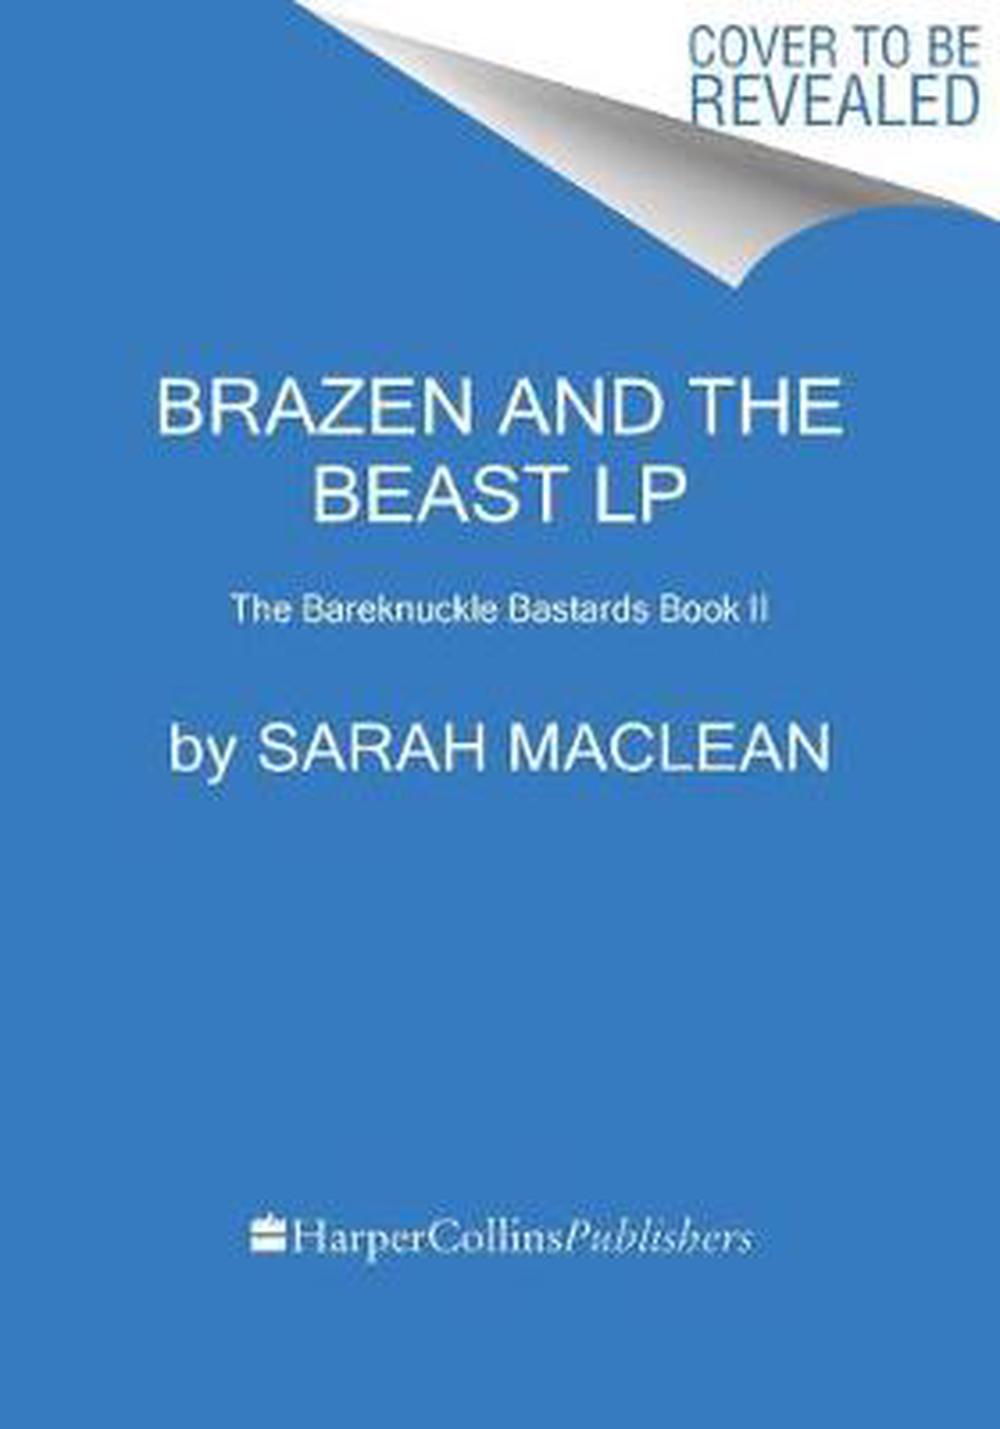 brazen and the beast by sarah maclean